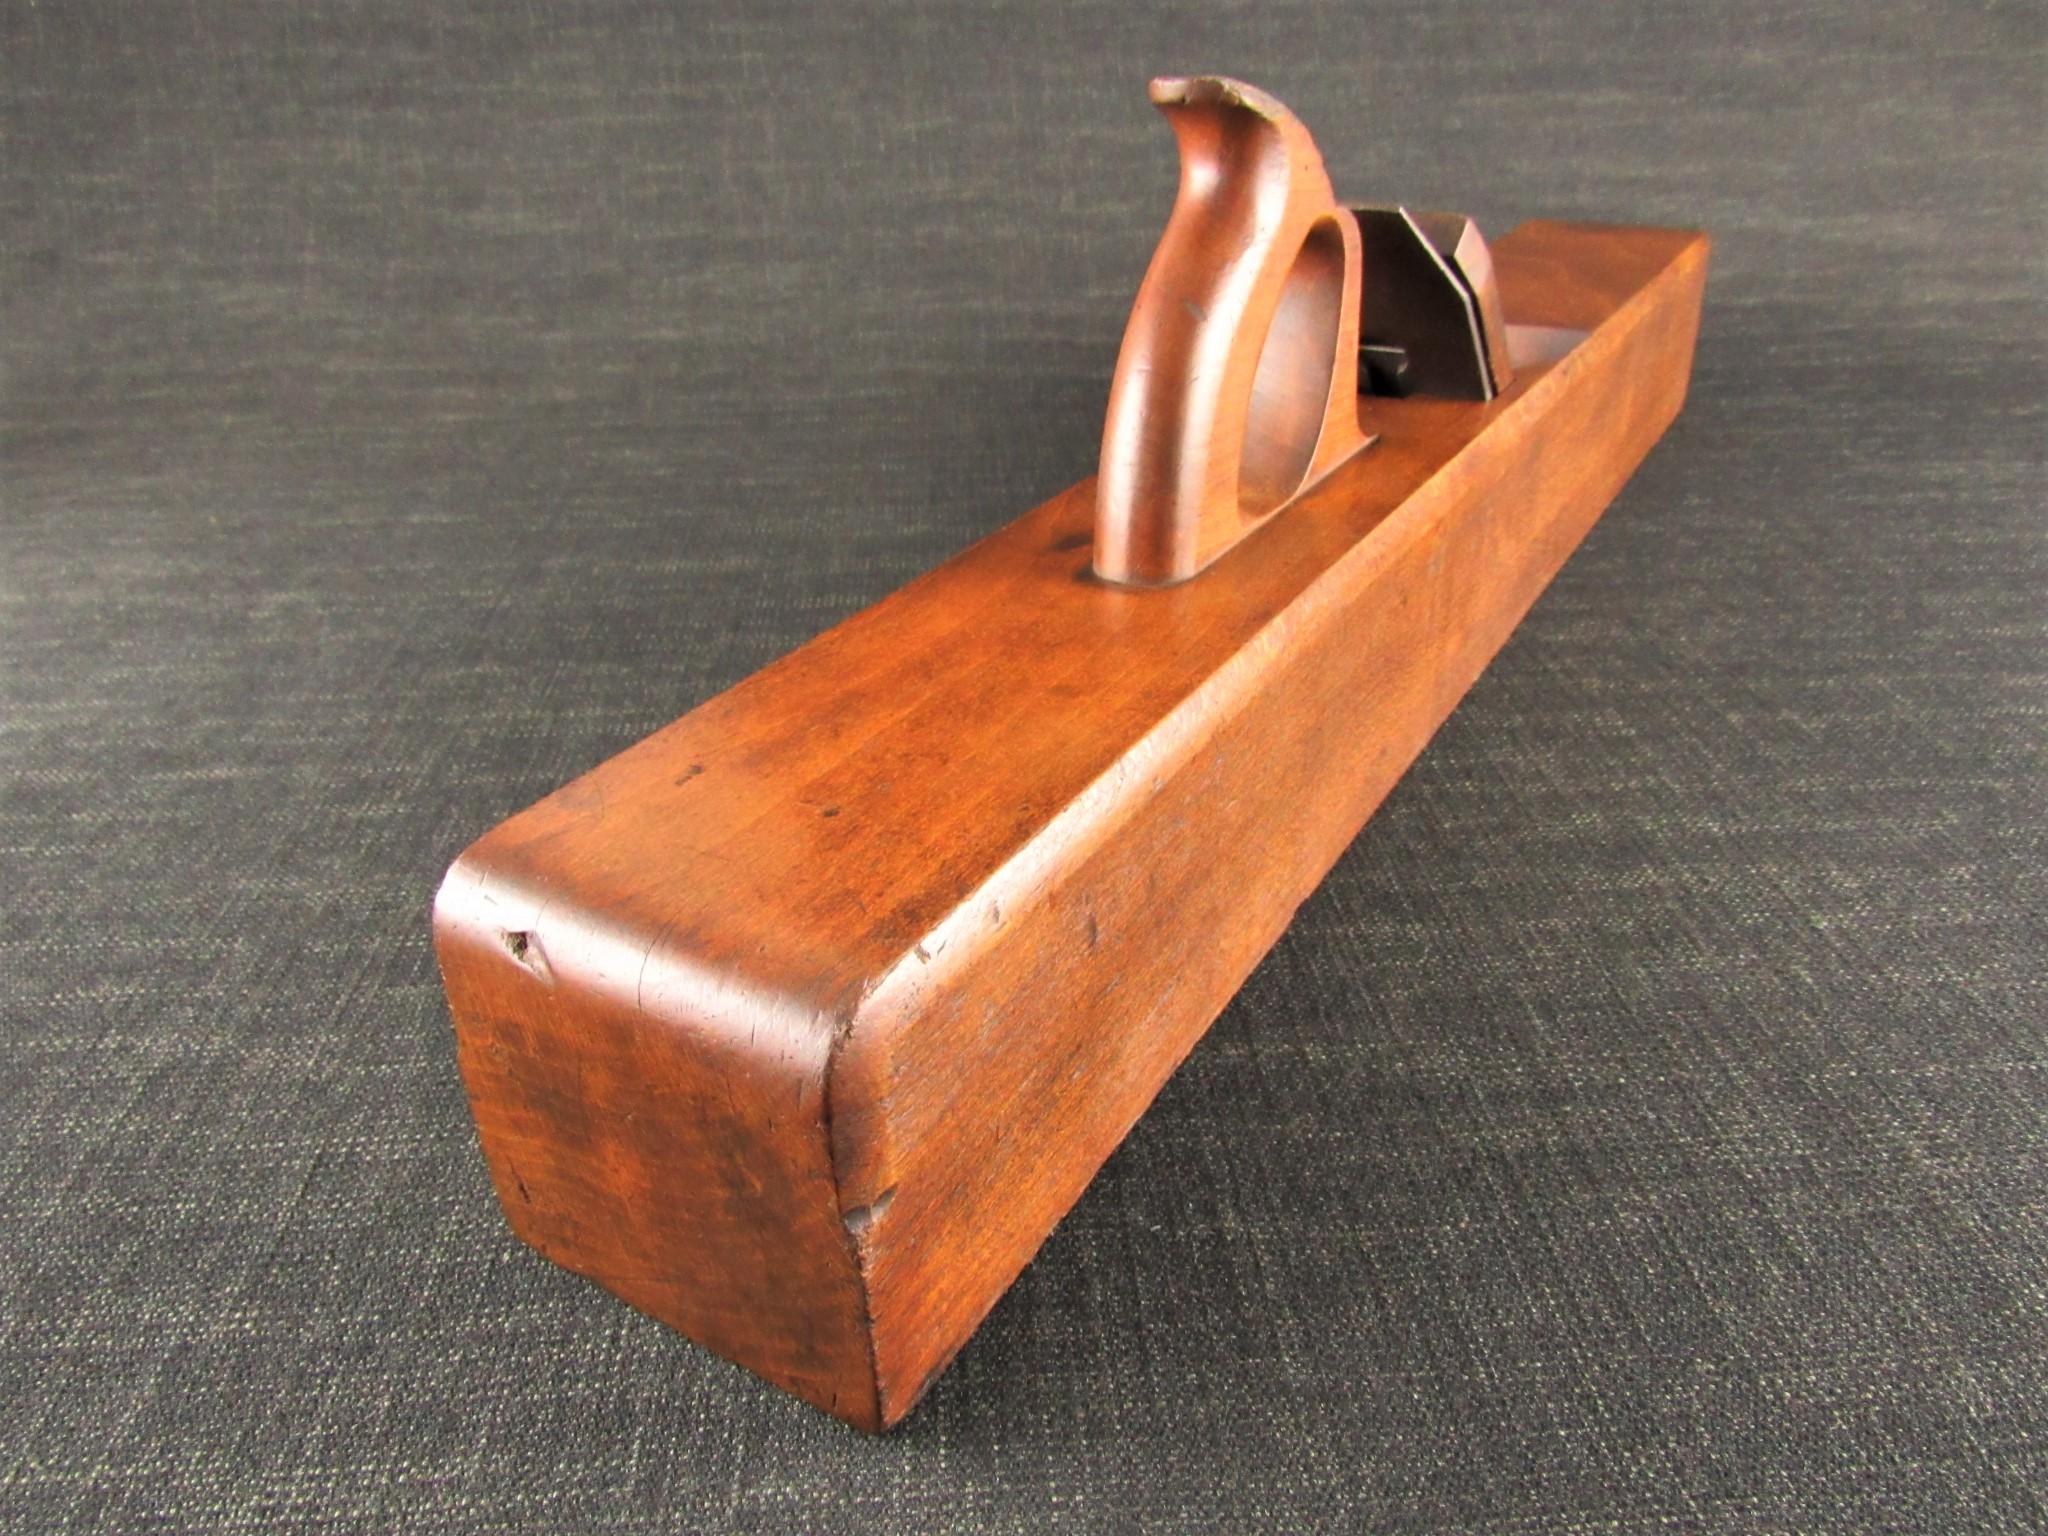 Antique NELSON Jointer Plane with Offset Handle - 26 inch